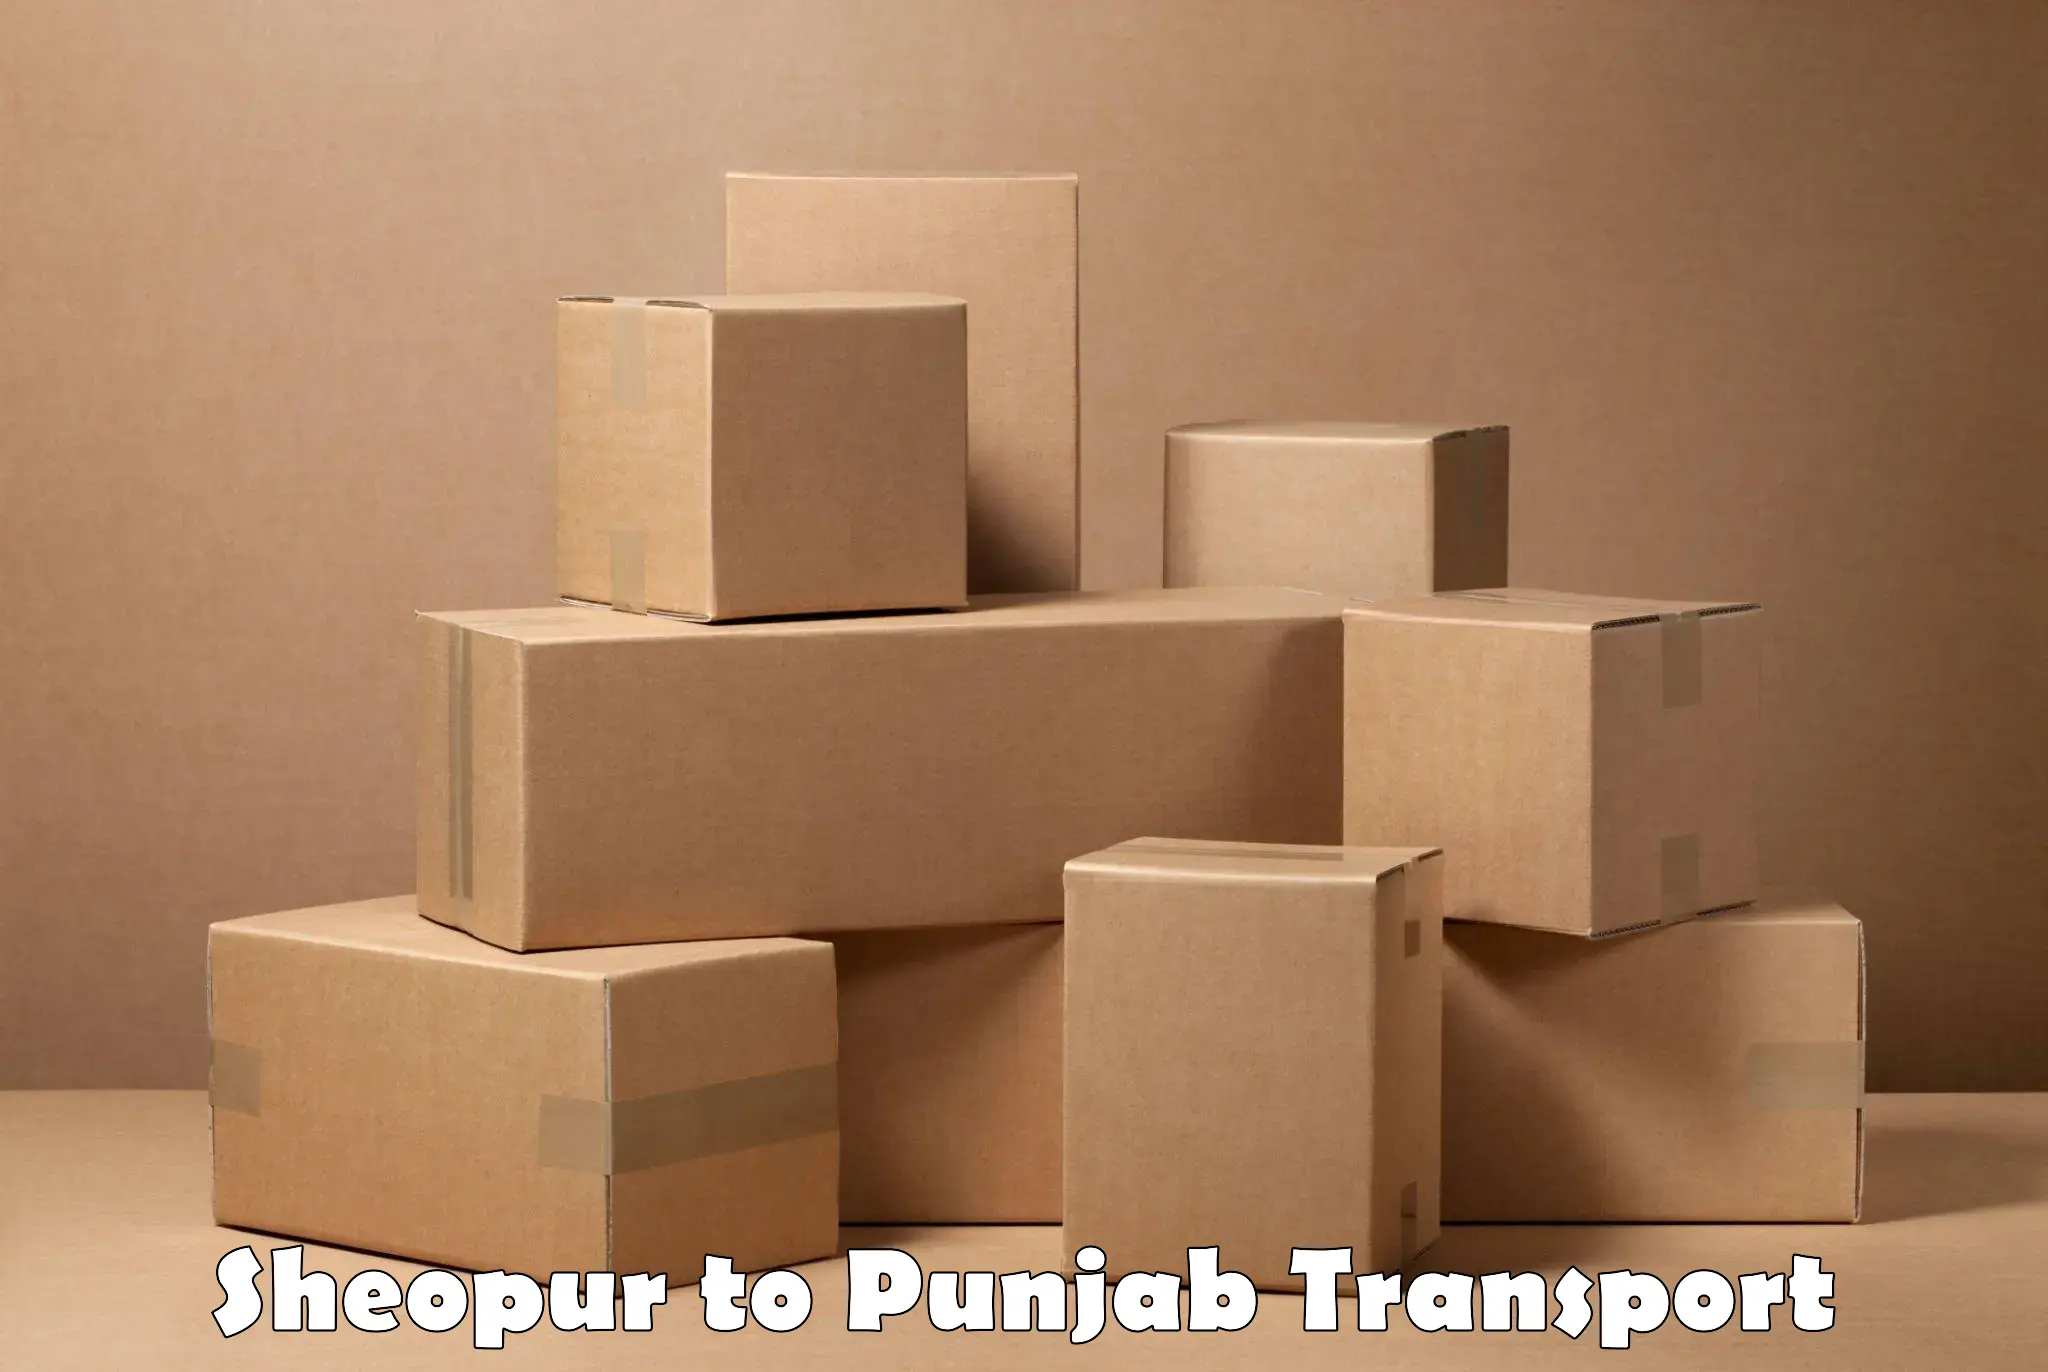 Container transport service Sheopur to Patiala